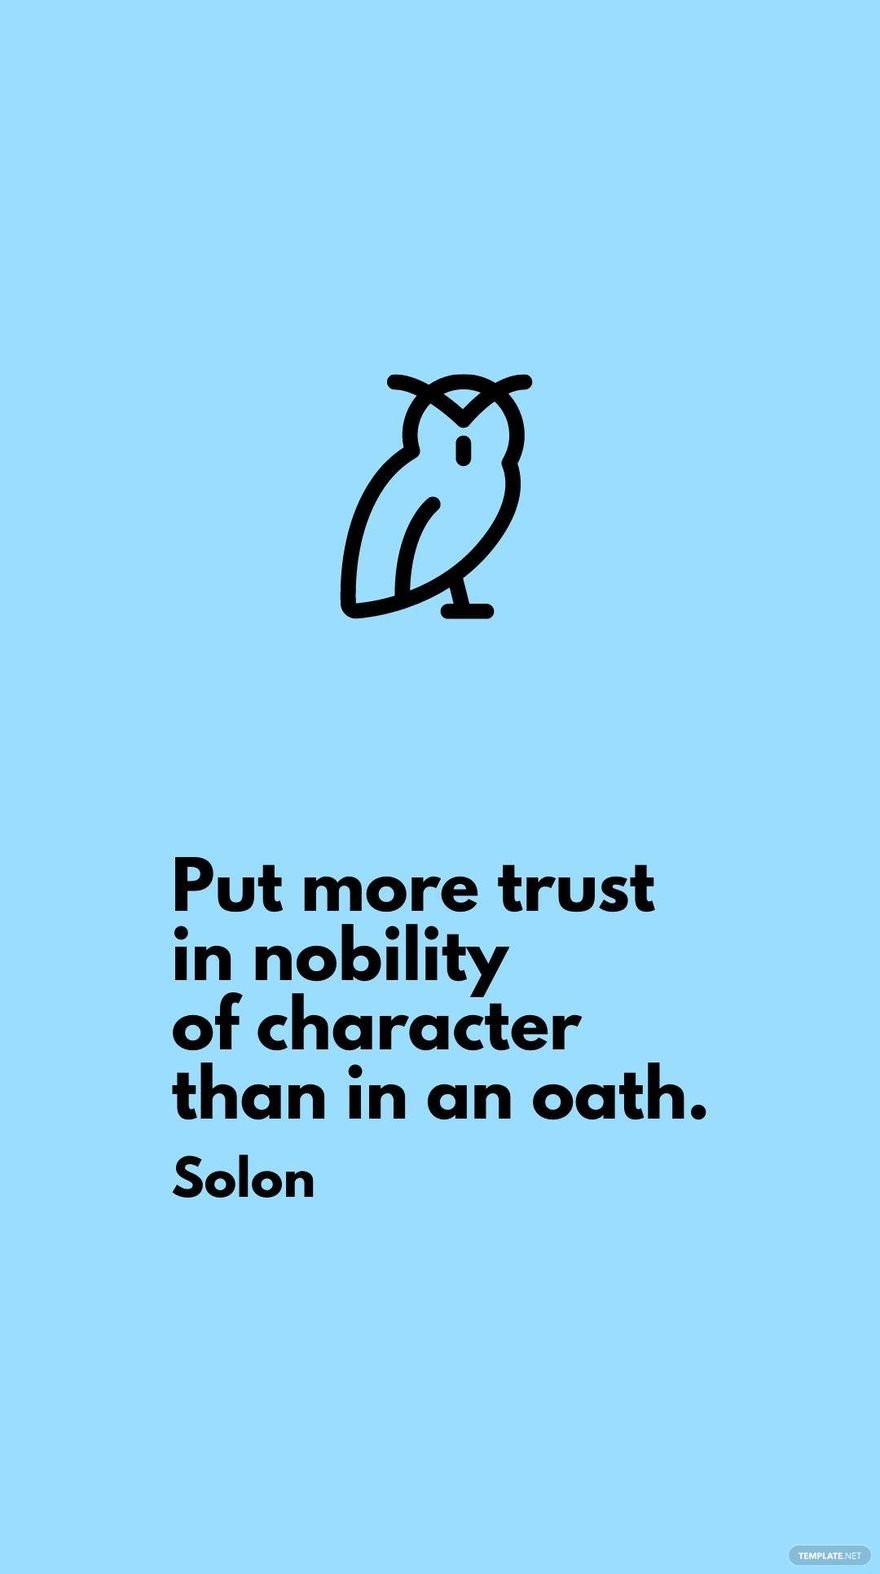 Solon - Put more trust in nobility of character than in an oath.